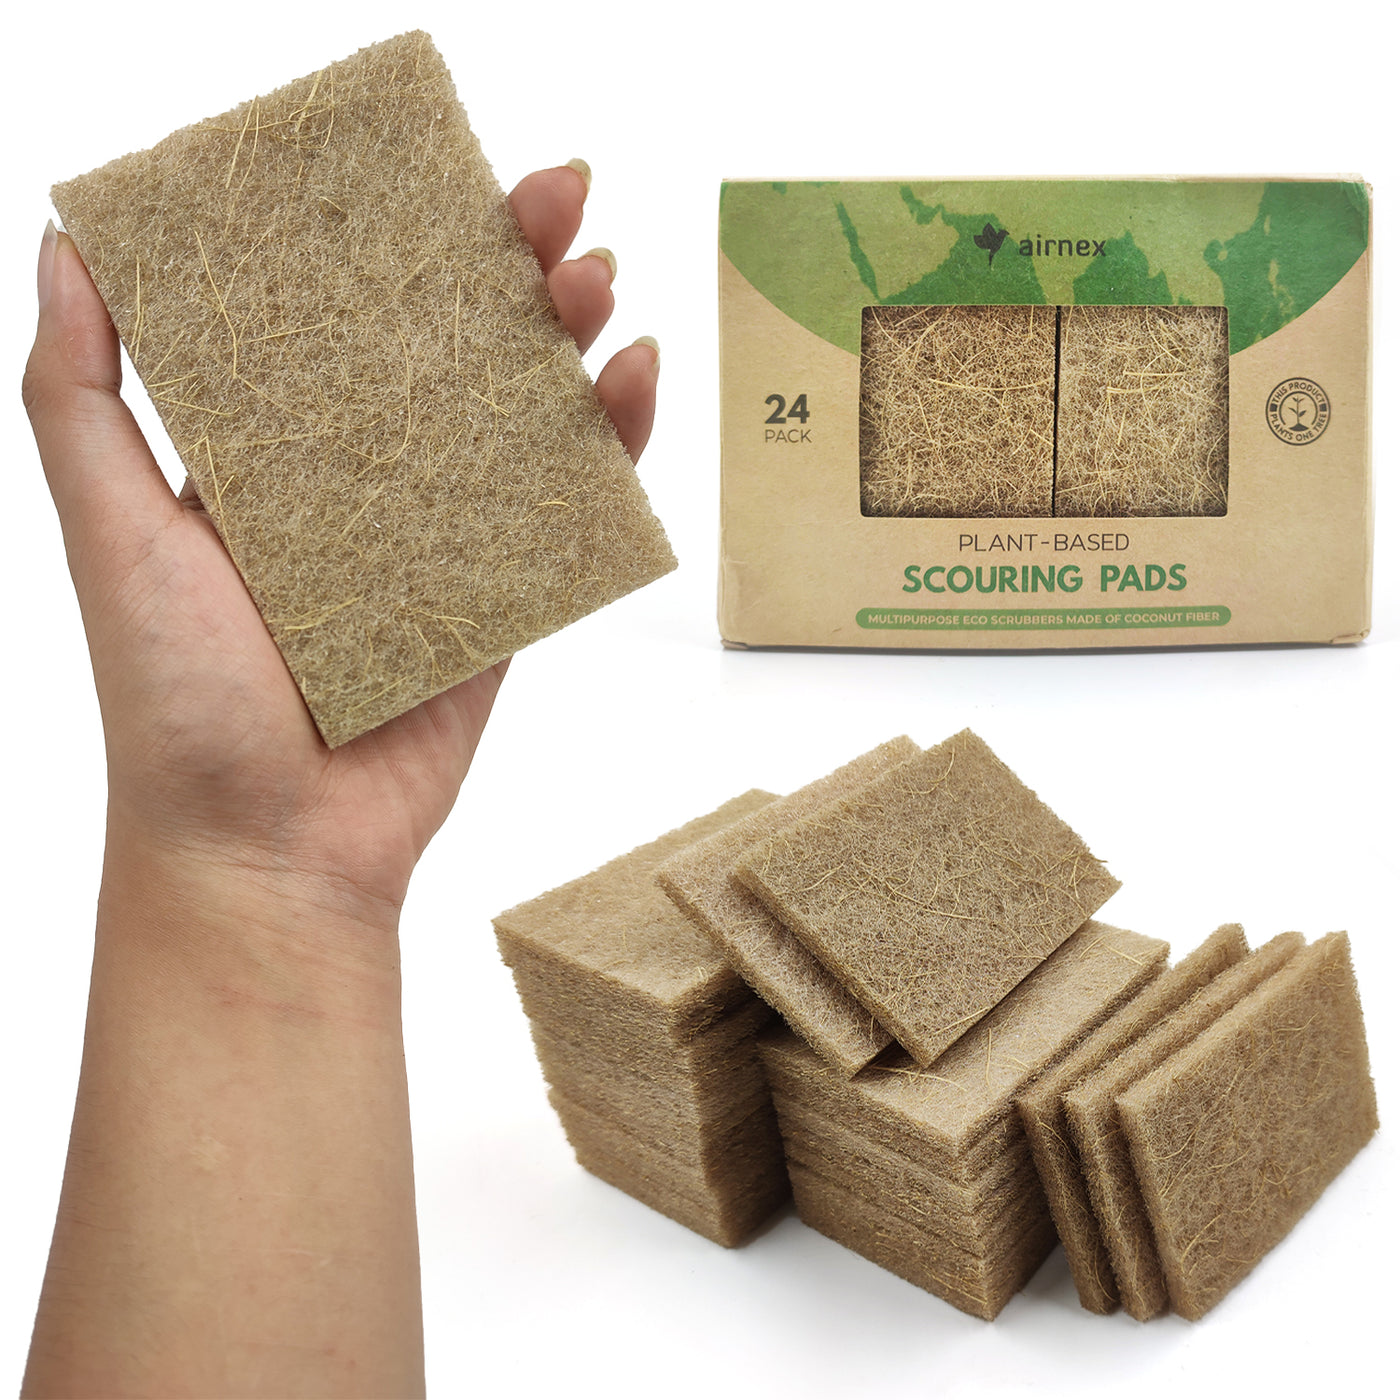 Biodegradable Scrubbing Pads for Dishes - Coconut Fiber Scrub Pads for Dishes - Non Scratch Scouring Pads for Pots and Pans